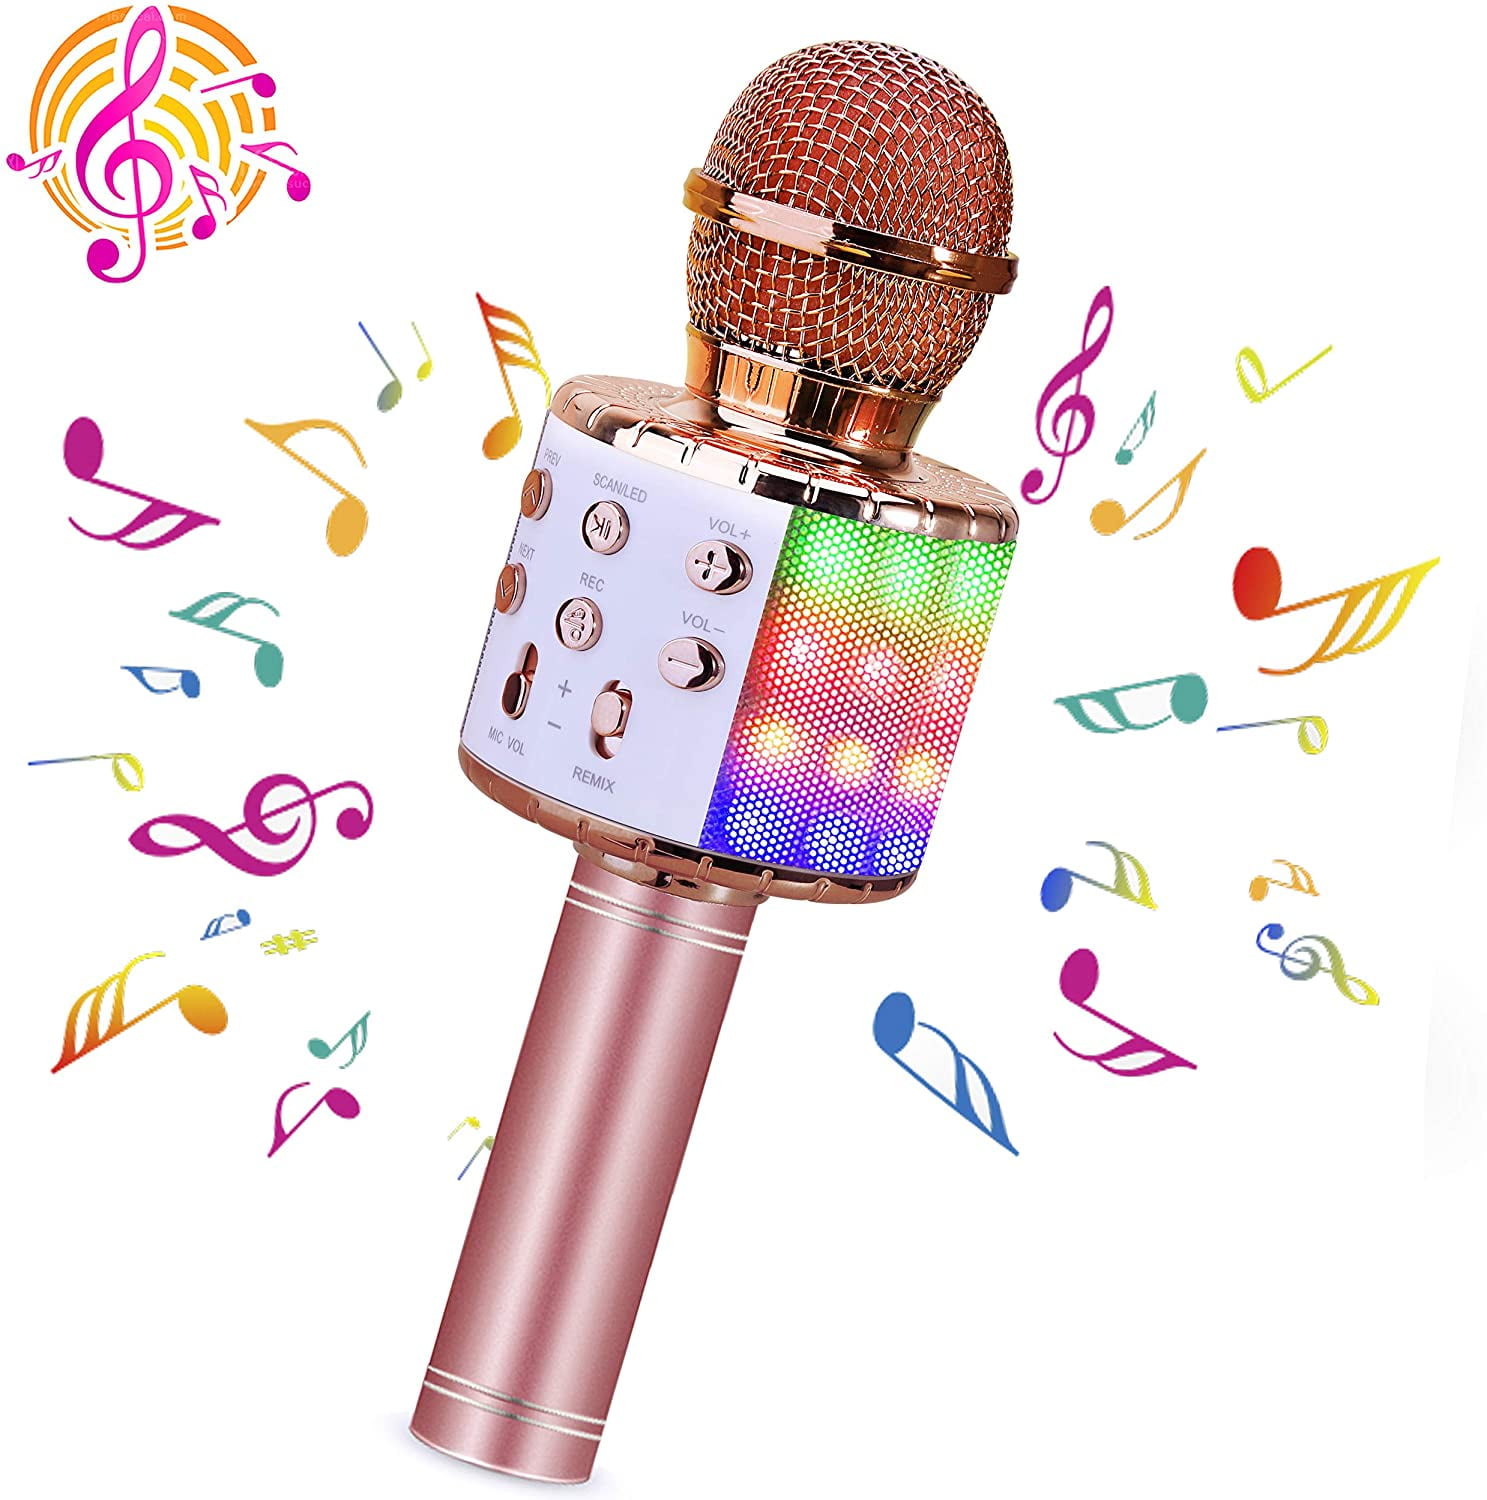 Black Portable Handheld Speaker Mic Machine Gift for Birthday/Christmas/Party/Family for Phone/iPad/PC Verkstar Upgraded Wireless Bluetooth Karaoke Microphone with Controllable Colorful LED Lights 